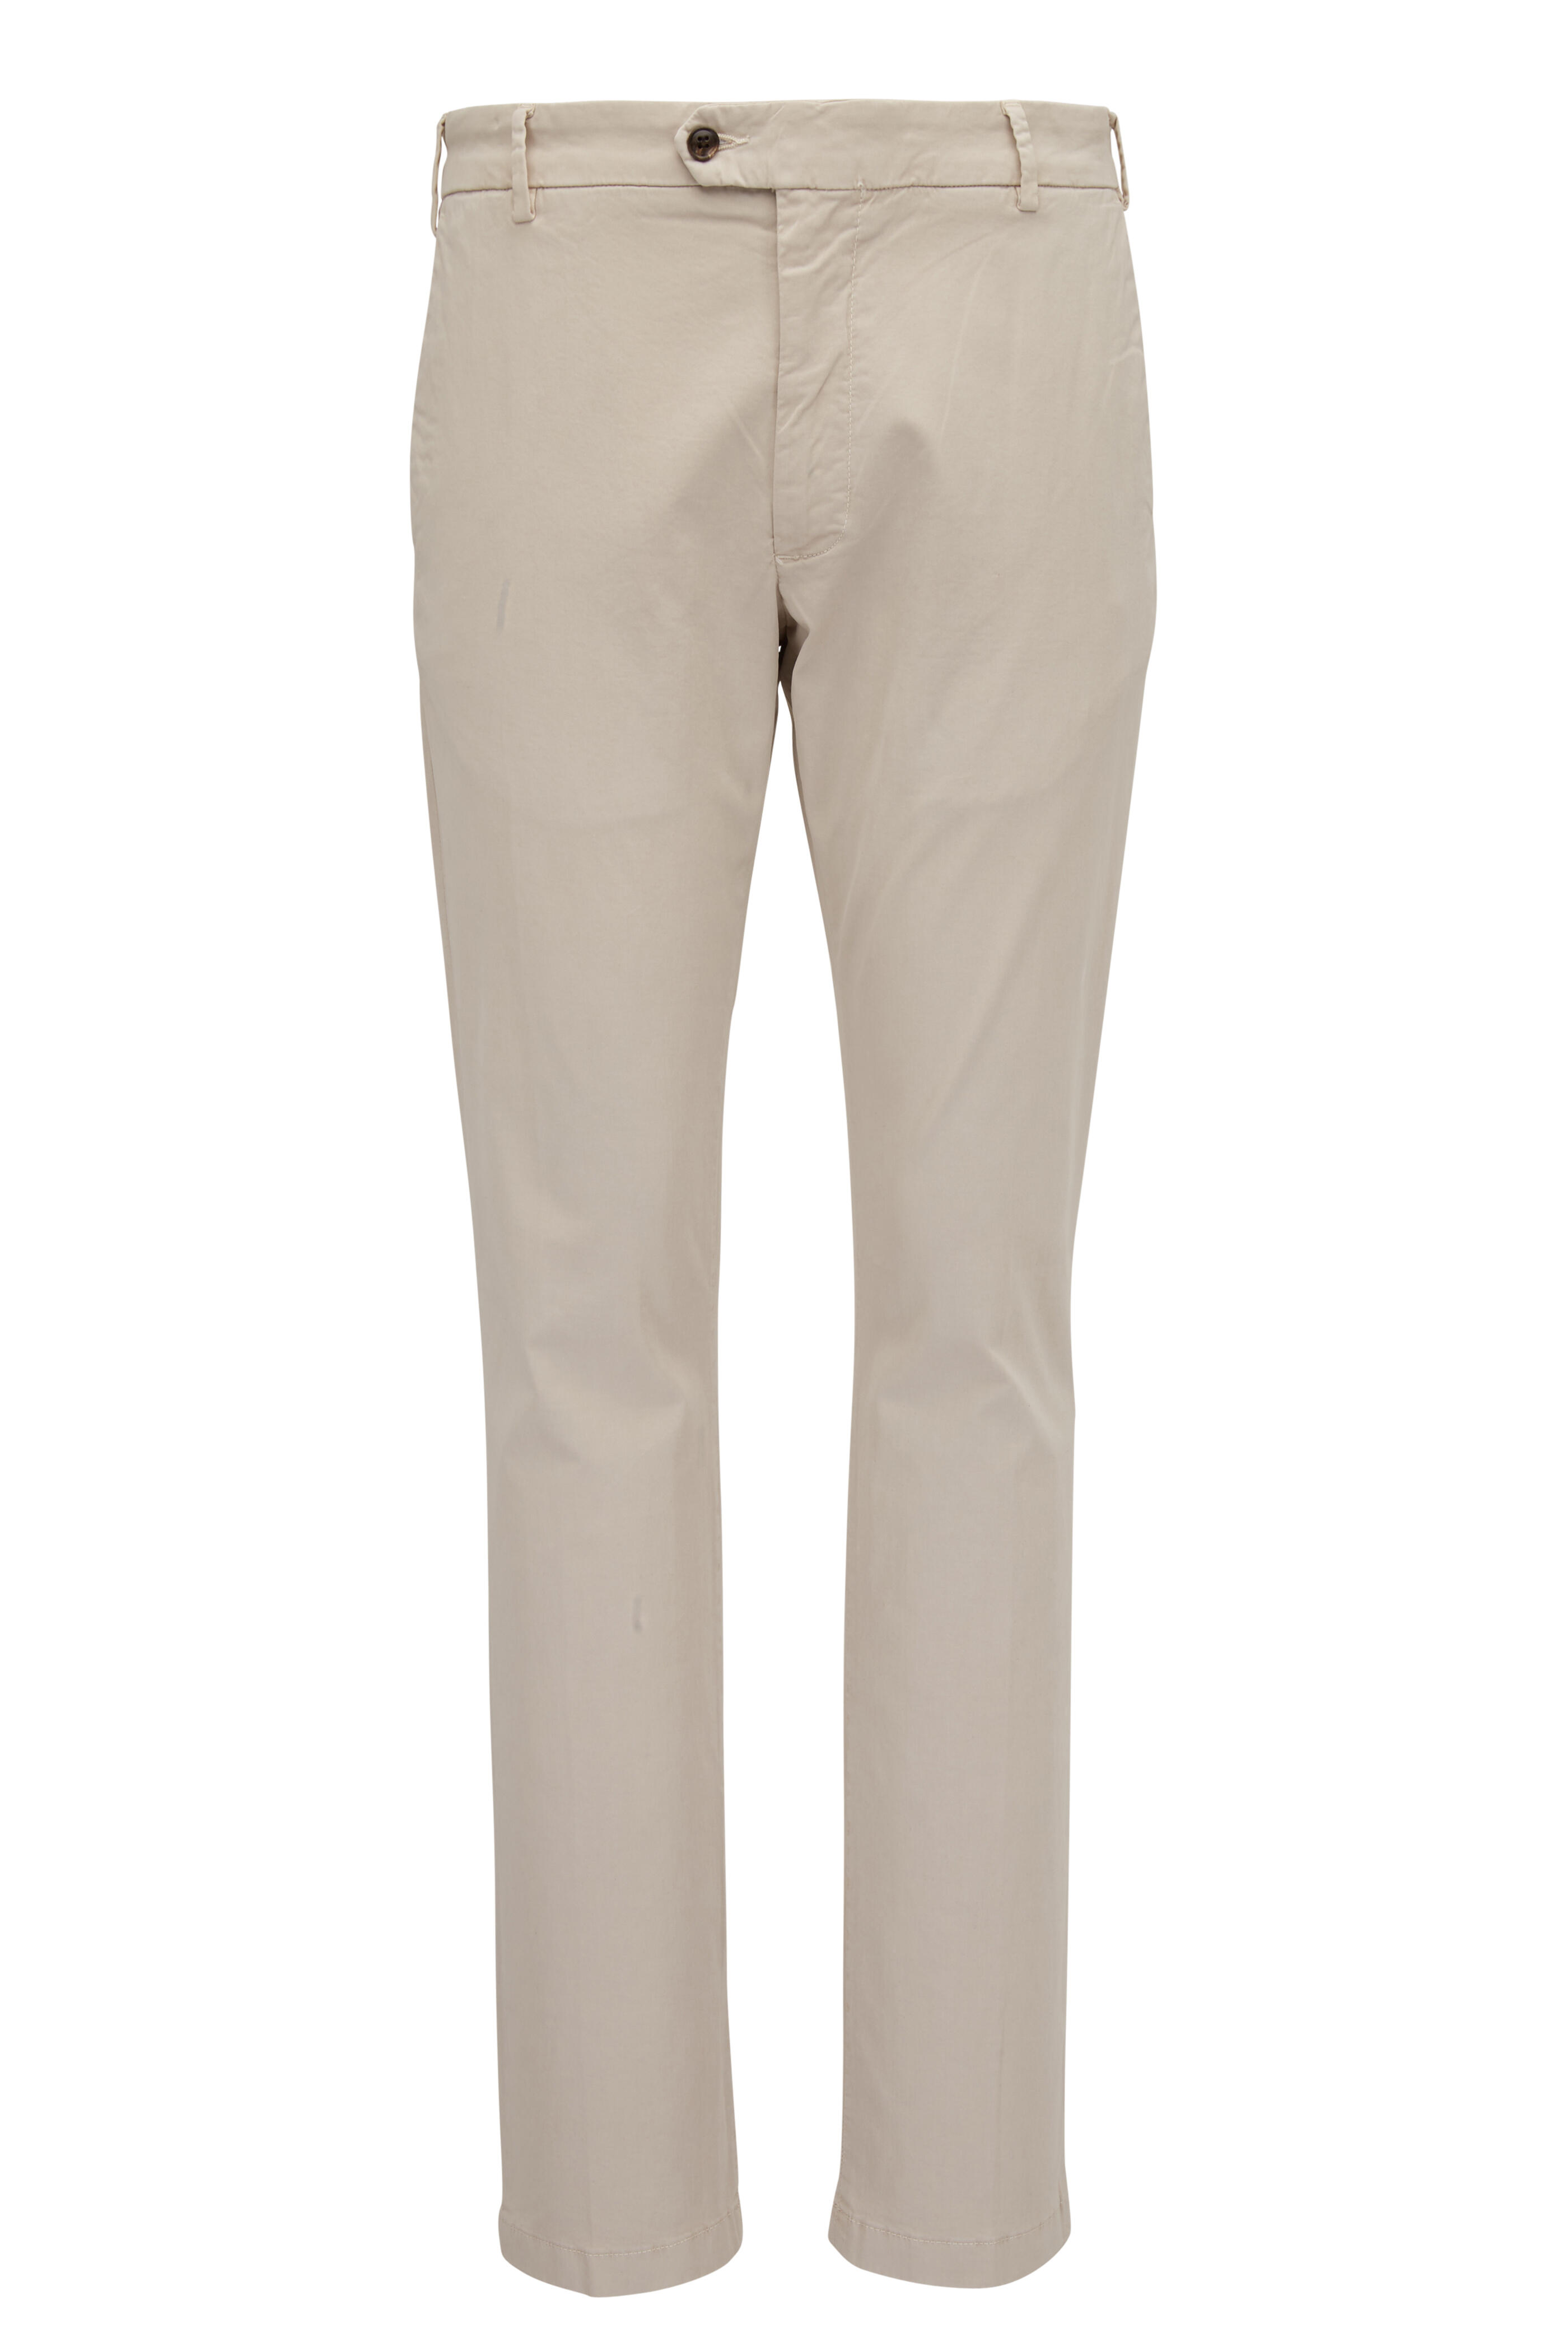 Peter Millar - Concorde Stone Flat Front Garment Dyed Pant